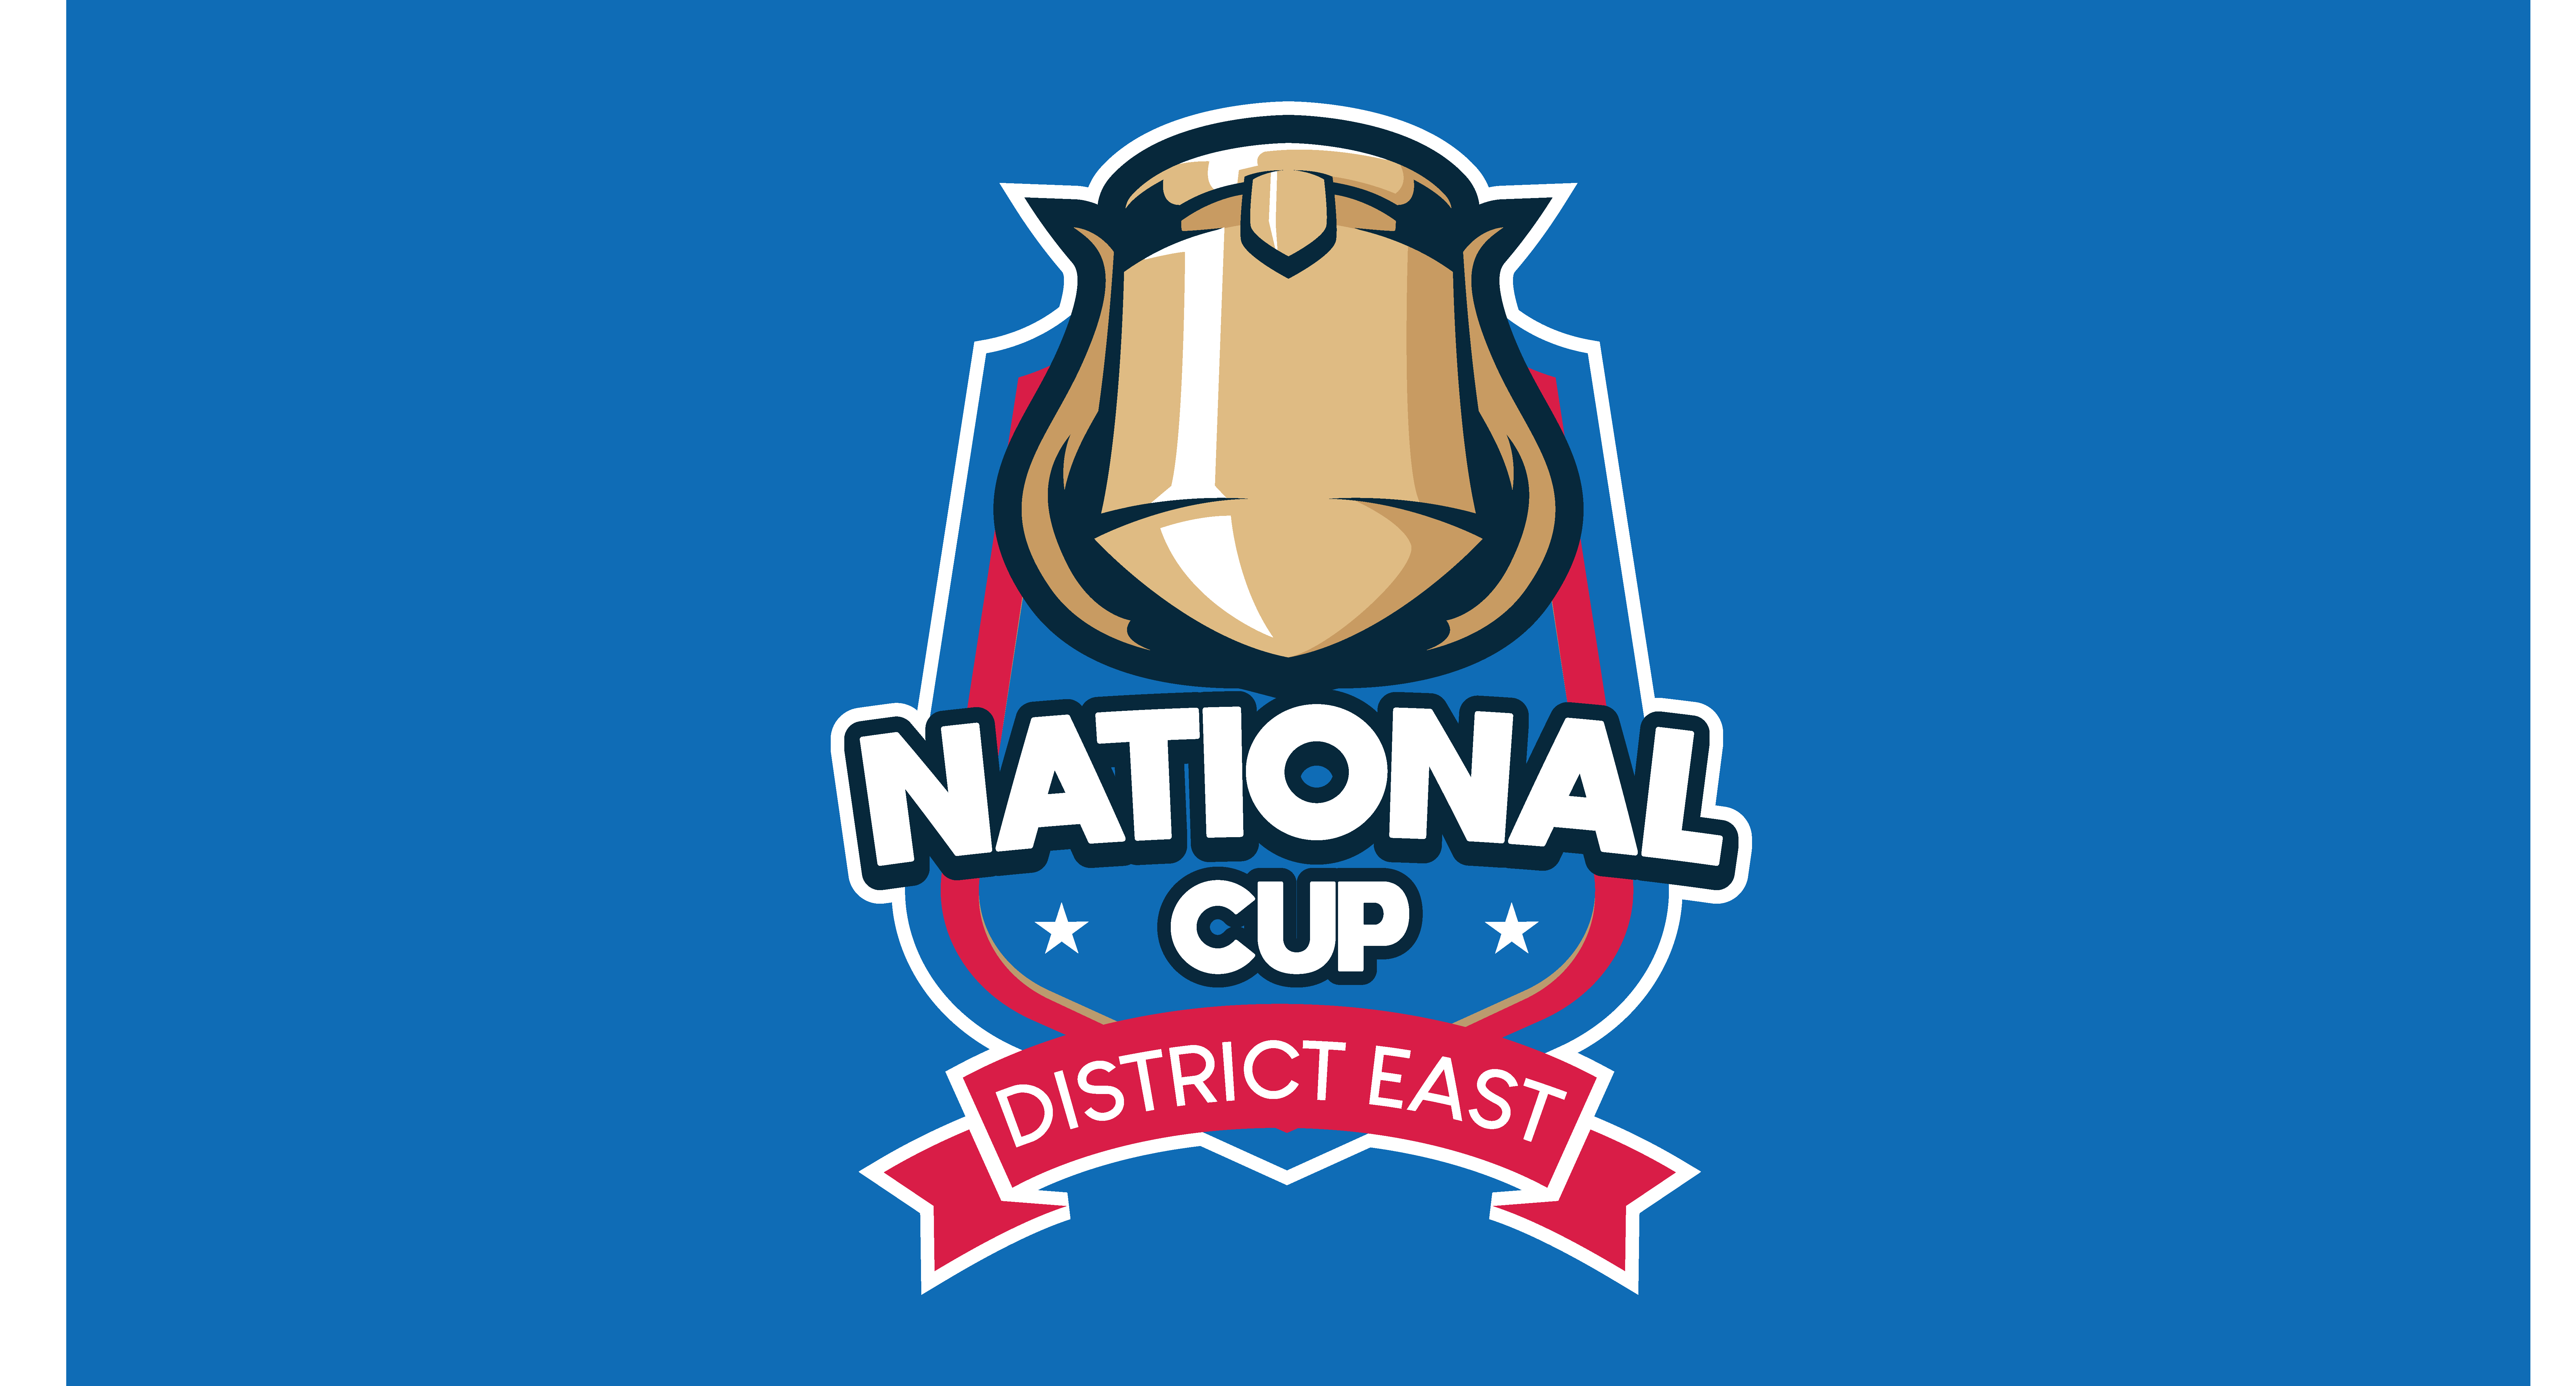 National Cup District East